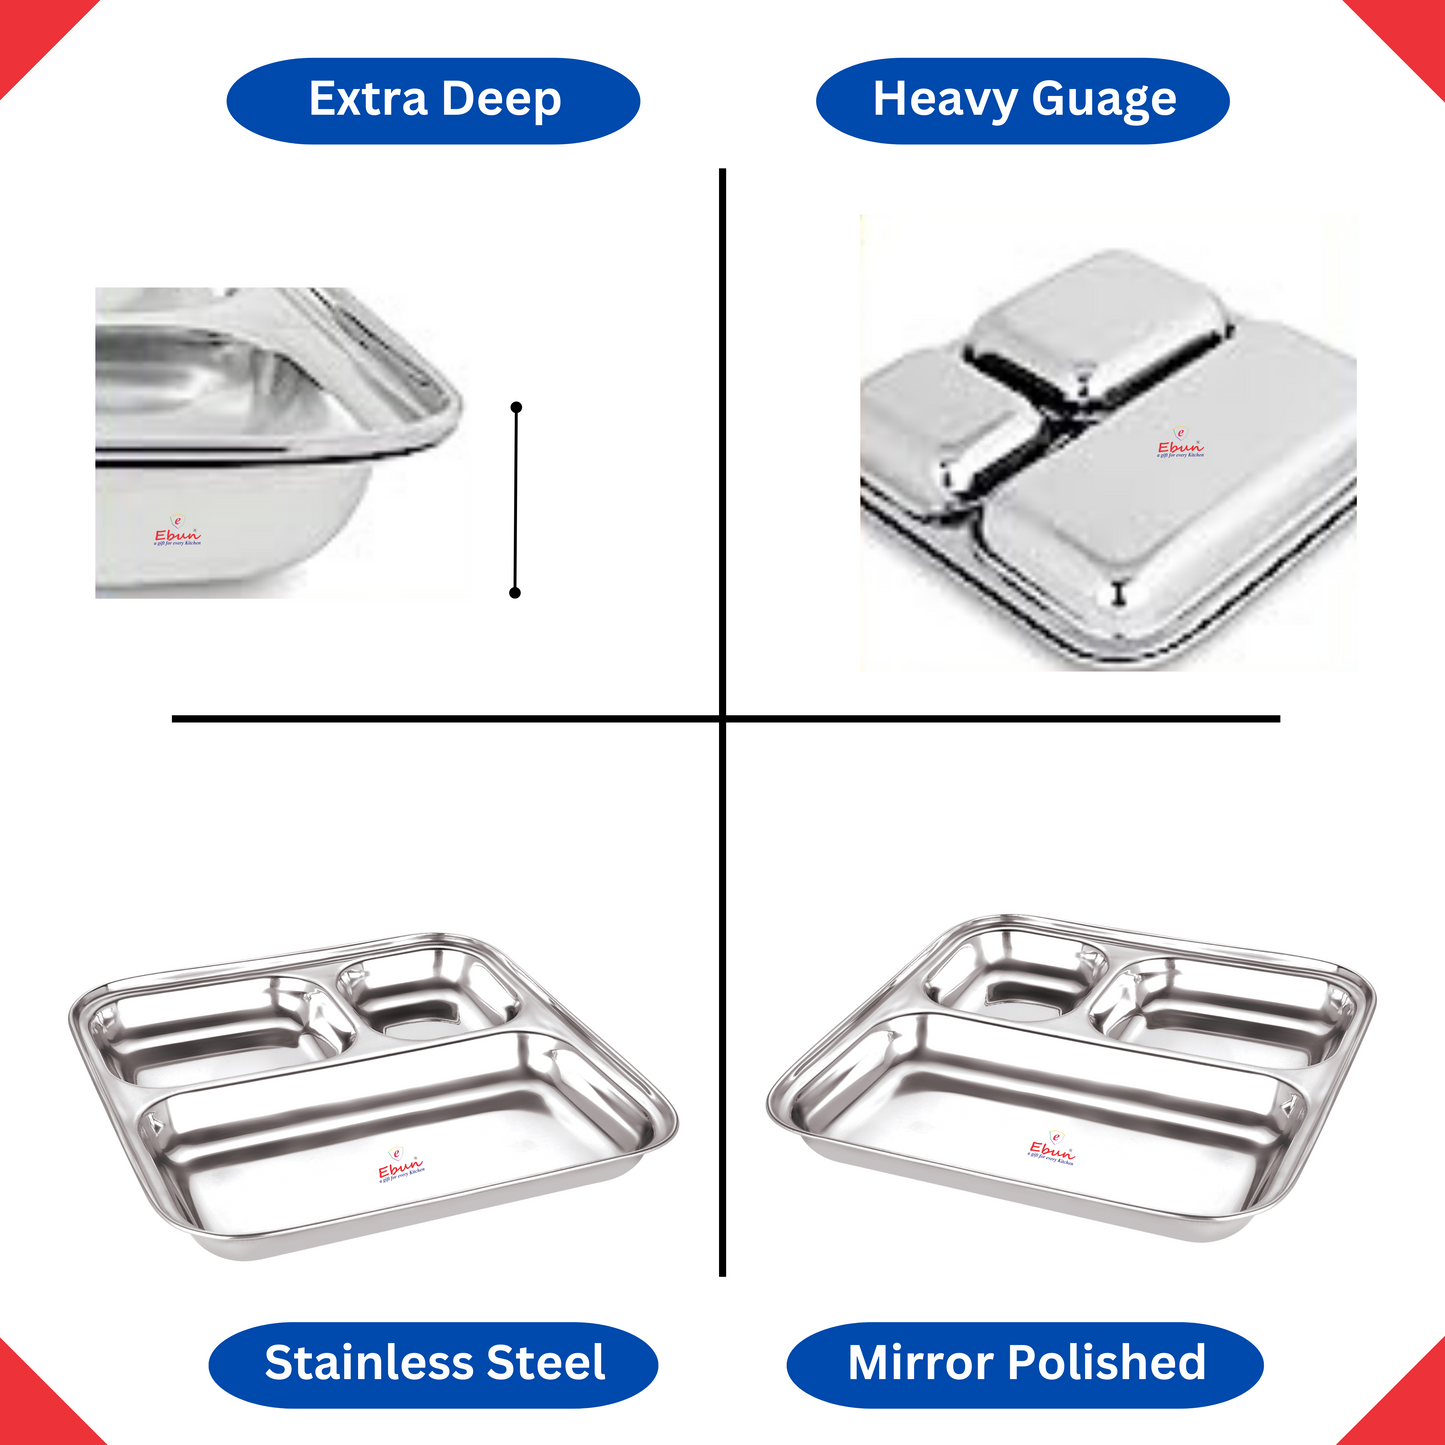 steel plates set of 12 | stainless steel plates set of 6 | stainless steel plate | steel plates set of 4 | steel plates for kids | lunch plates stainless steel | steel plates set of 2 | stainless steel plates | steel plate set | steel plates set of 6 dinner plate | steel thali with compartments